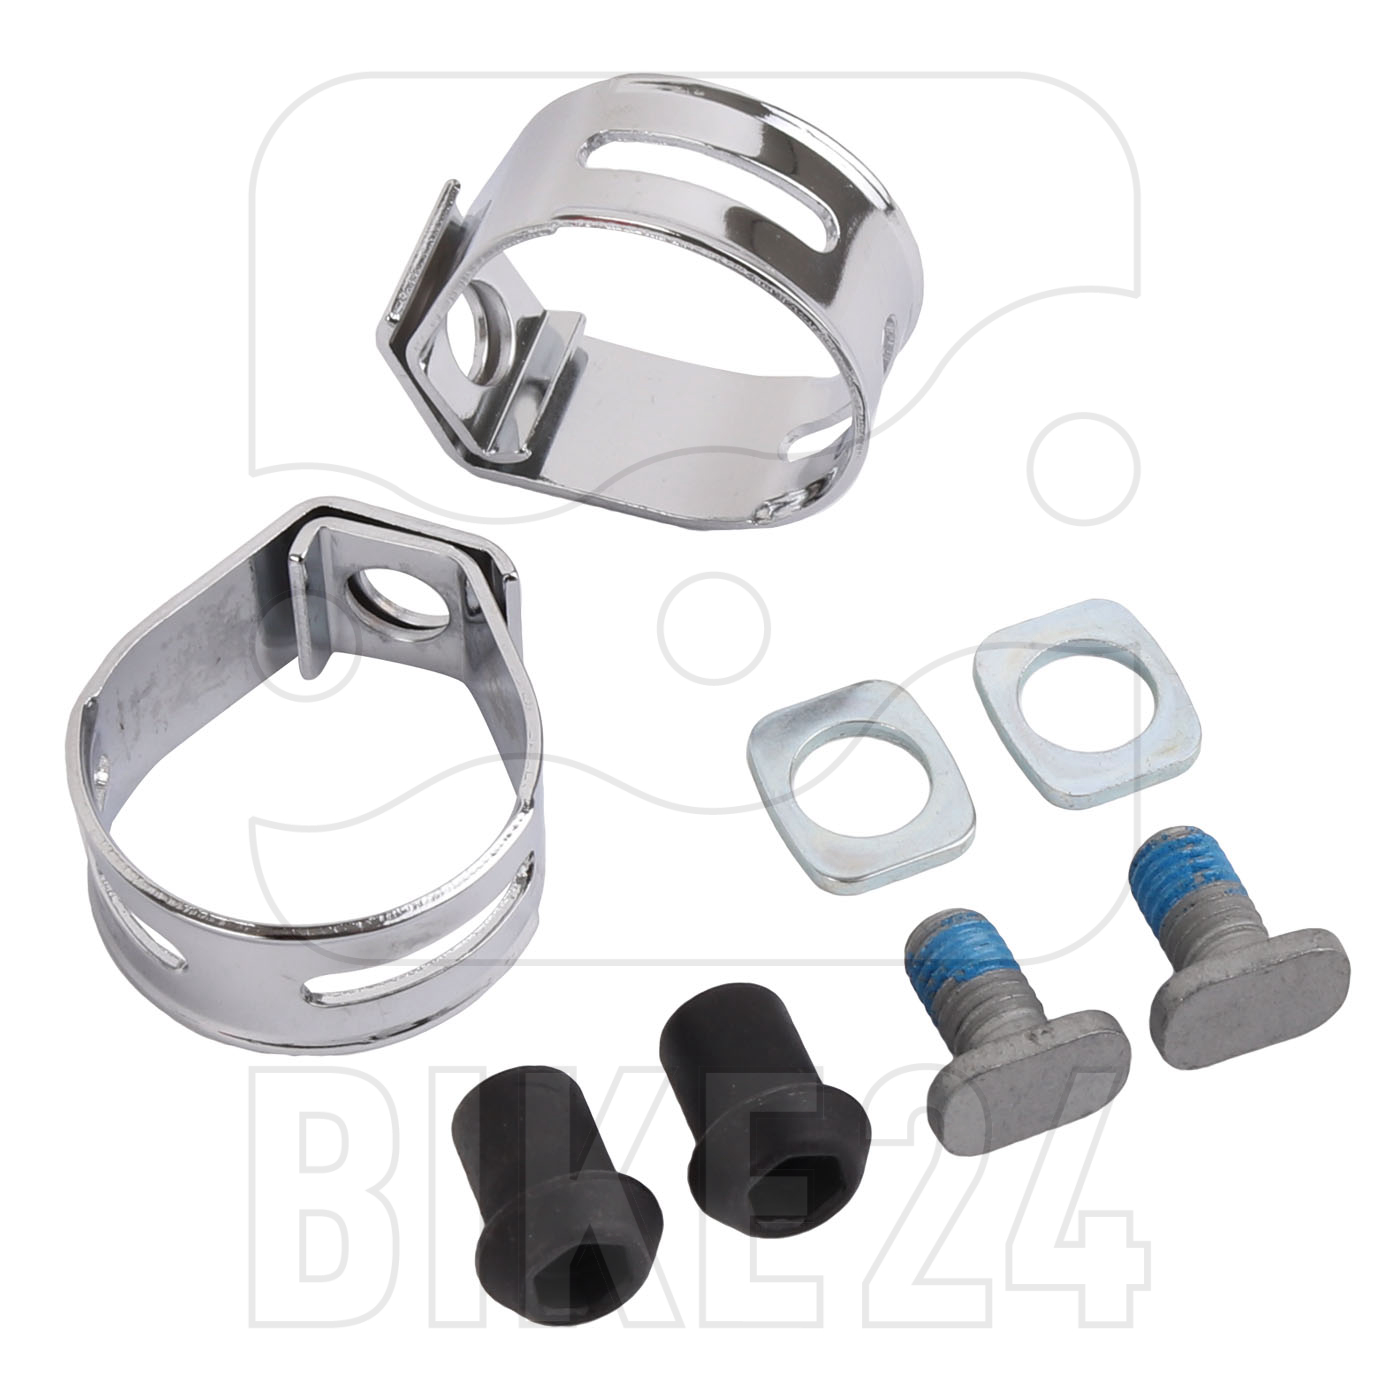 Picture of SRAM Shifter Clamp Kit for Electronic Shifter (Disc Brake) Red, Force ETap AXS - 1 Pair - 11.7018.079.000